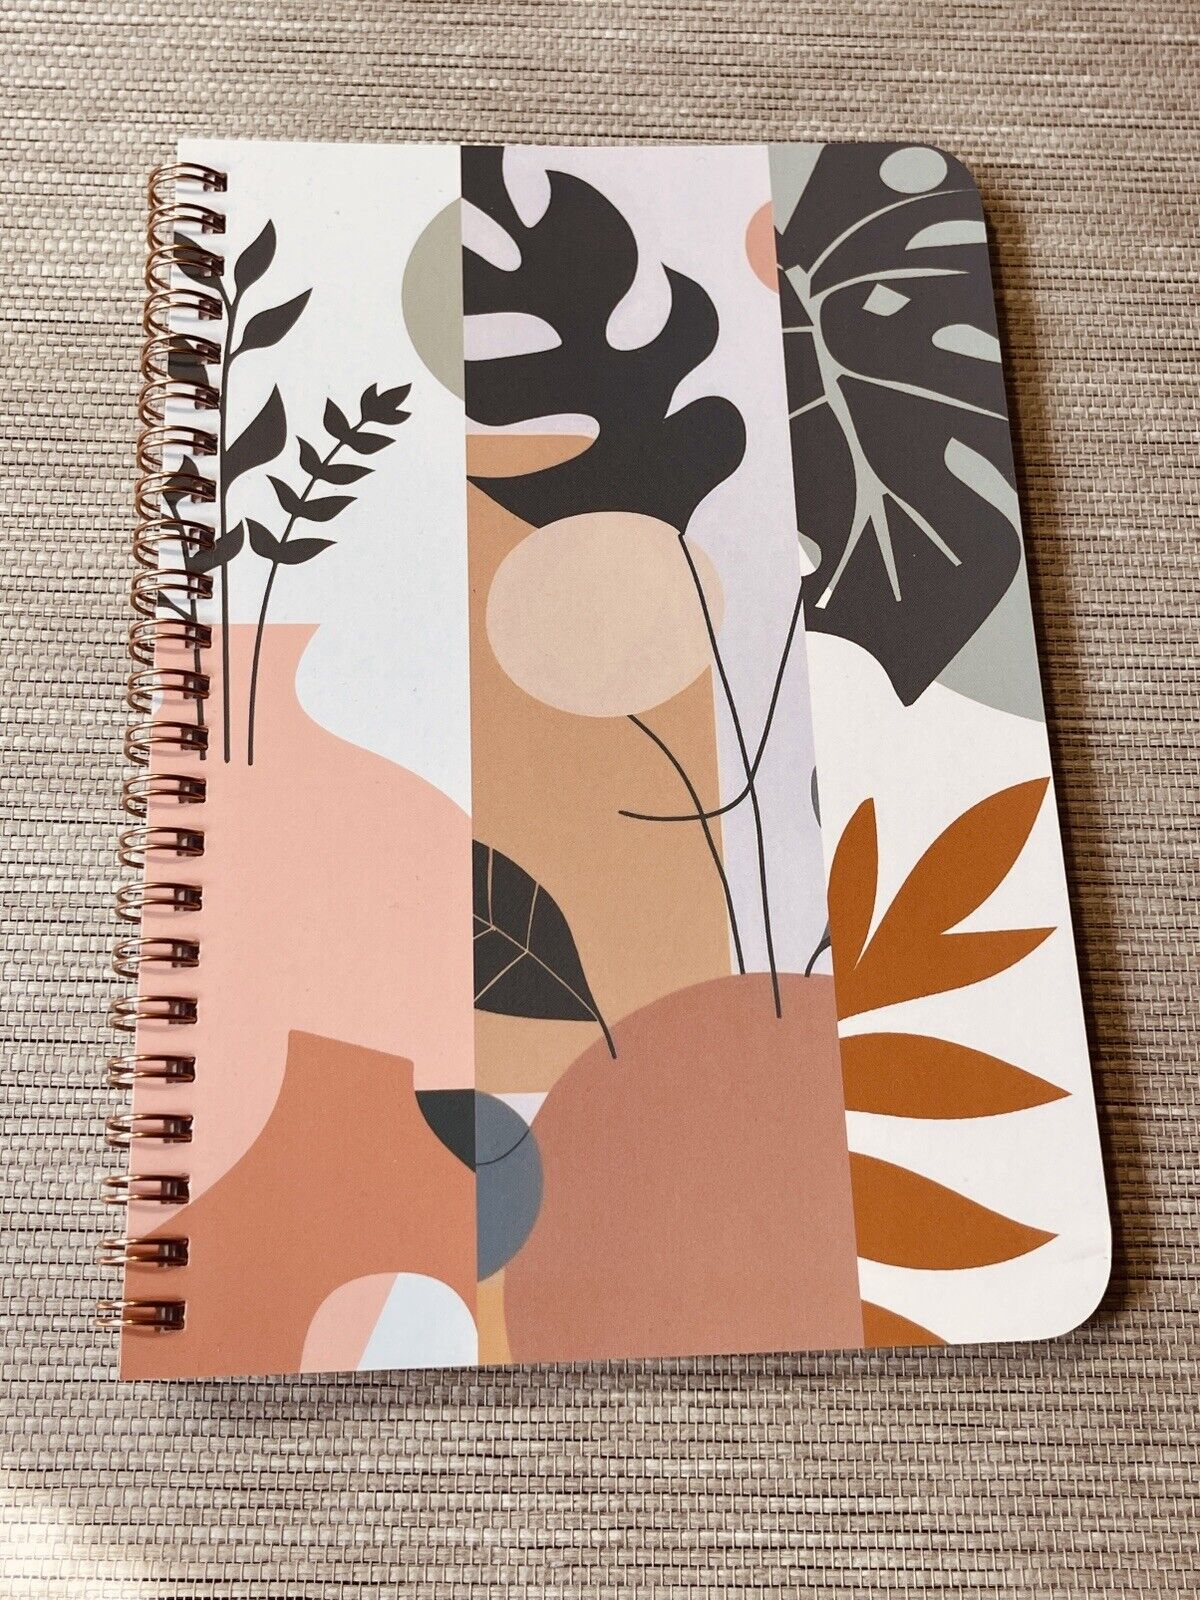 Boho Plants Spiral Notebook 5.5x8in Journal 84 Unlined Pages Soft Cover Handmade